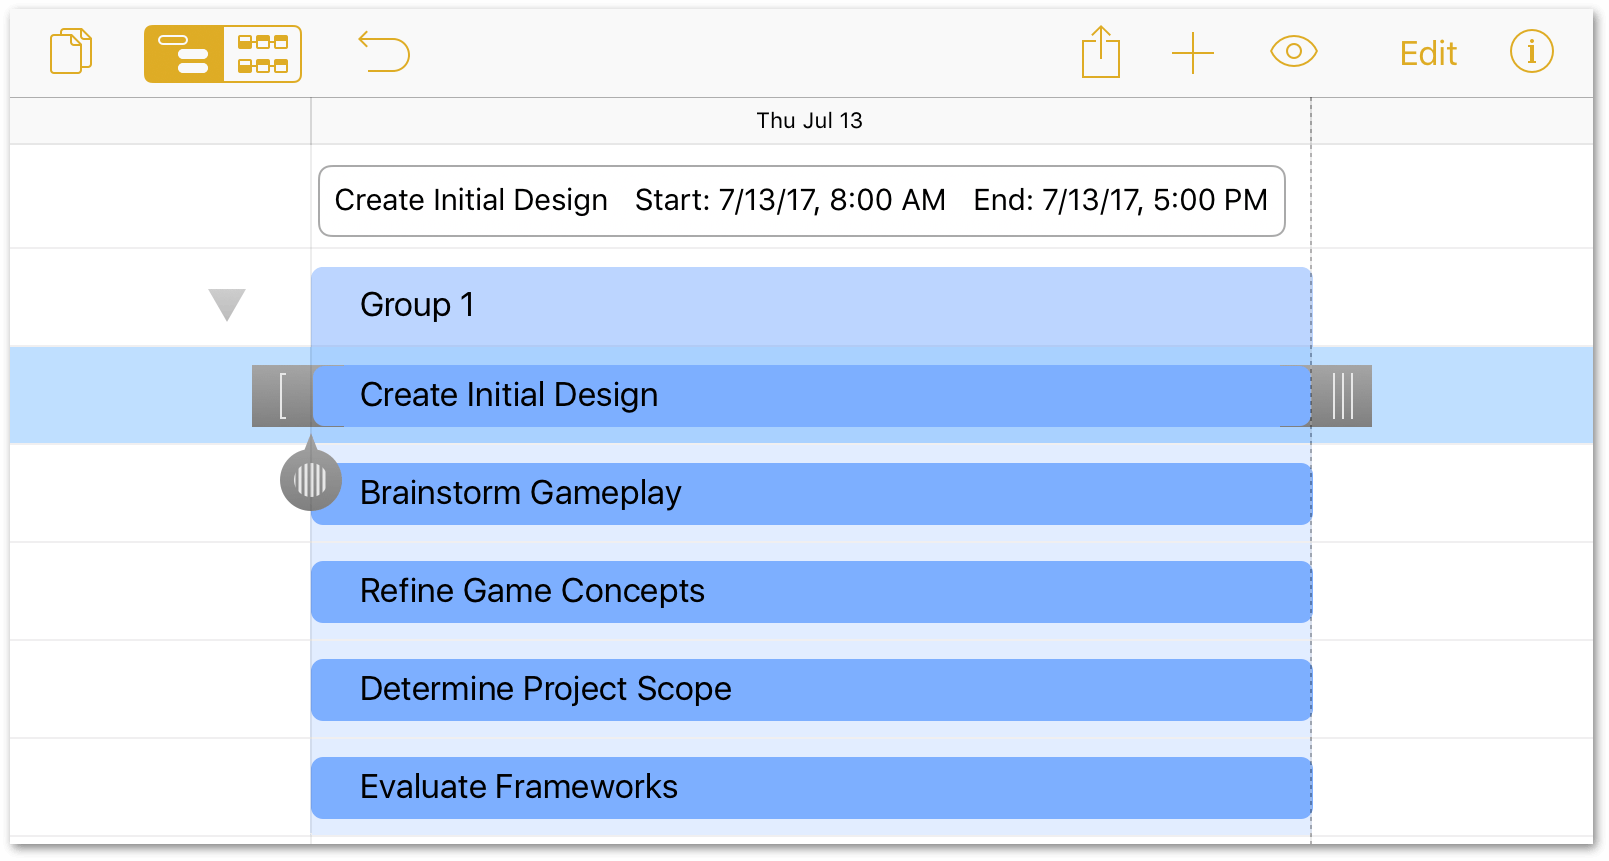 The Create Initial Design task, selected in the project editor